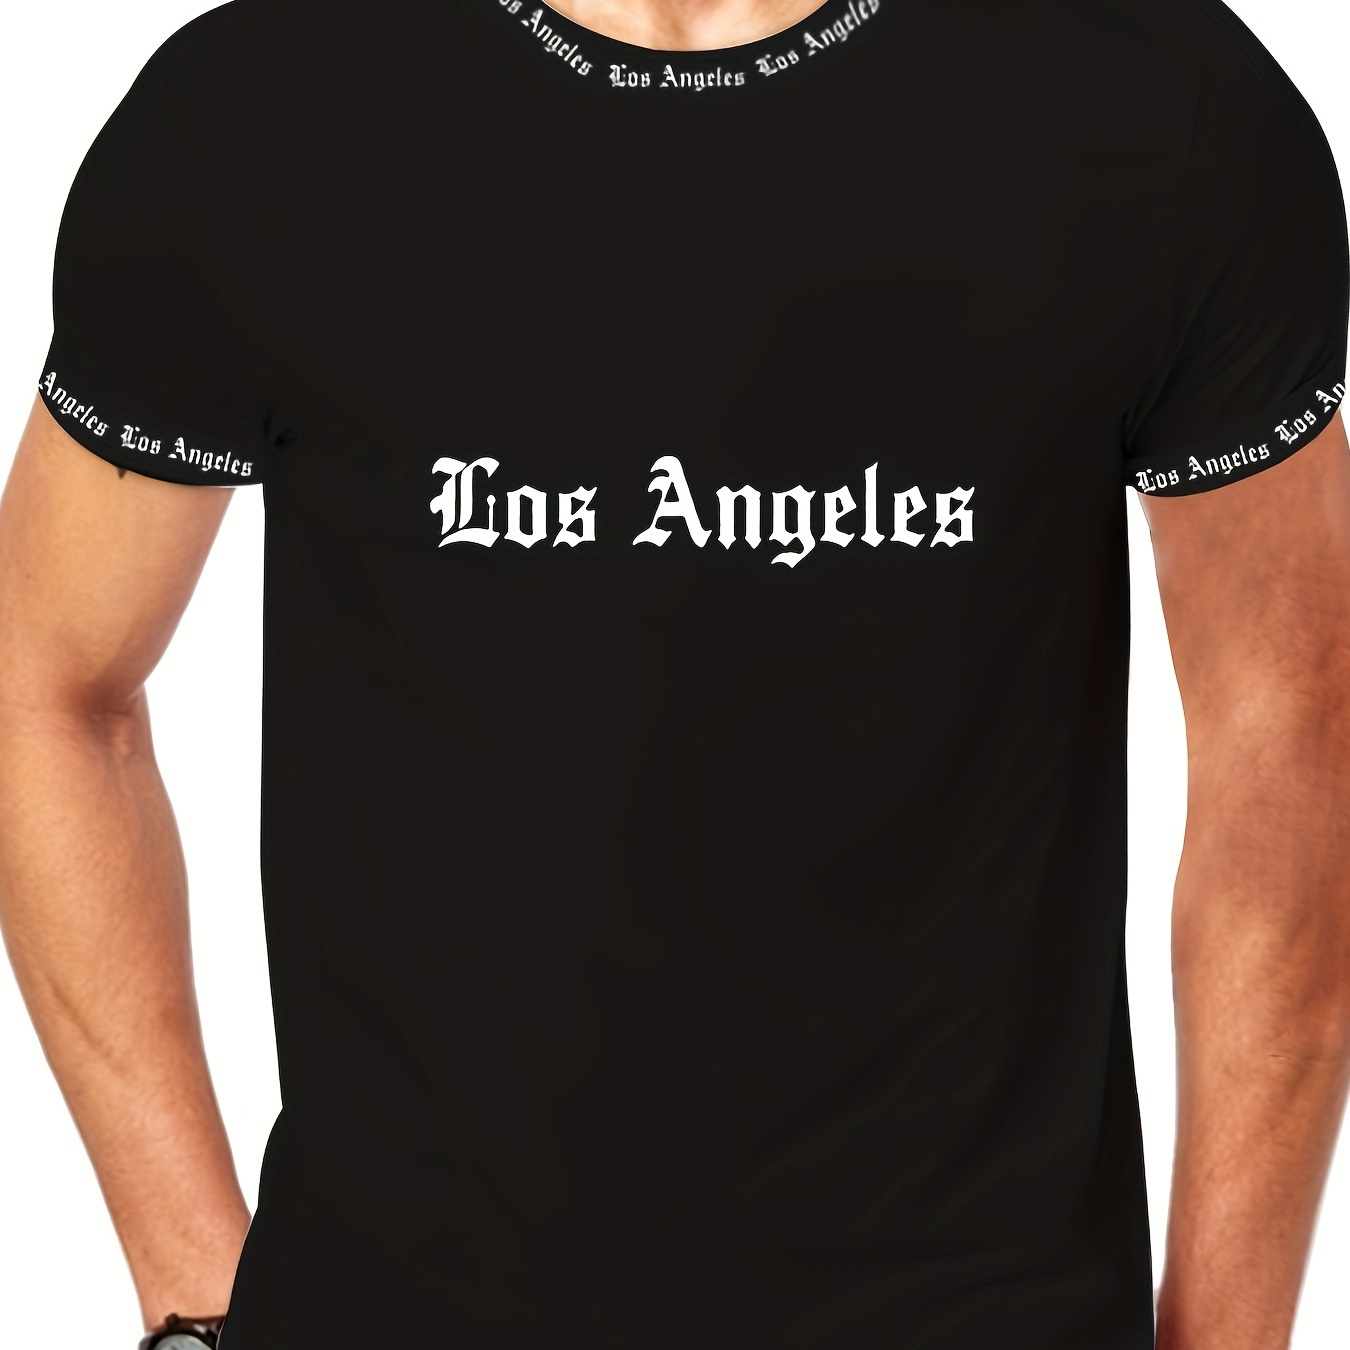 

Los Angeles Letter Print Men's Crew Neck Fashionable Short Sleeve Sports T-shirt, Comfortable And Versatile, For Summer And Spring, Athletic Style, Comfort Fit T-shirt, As Gifts